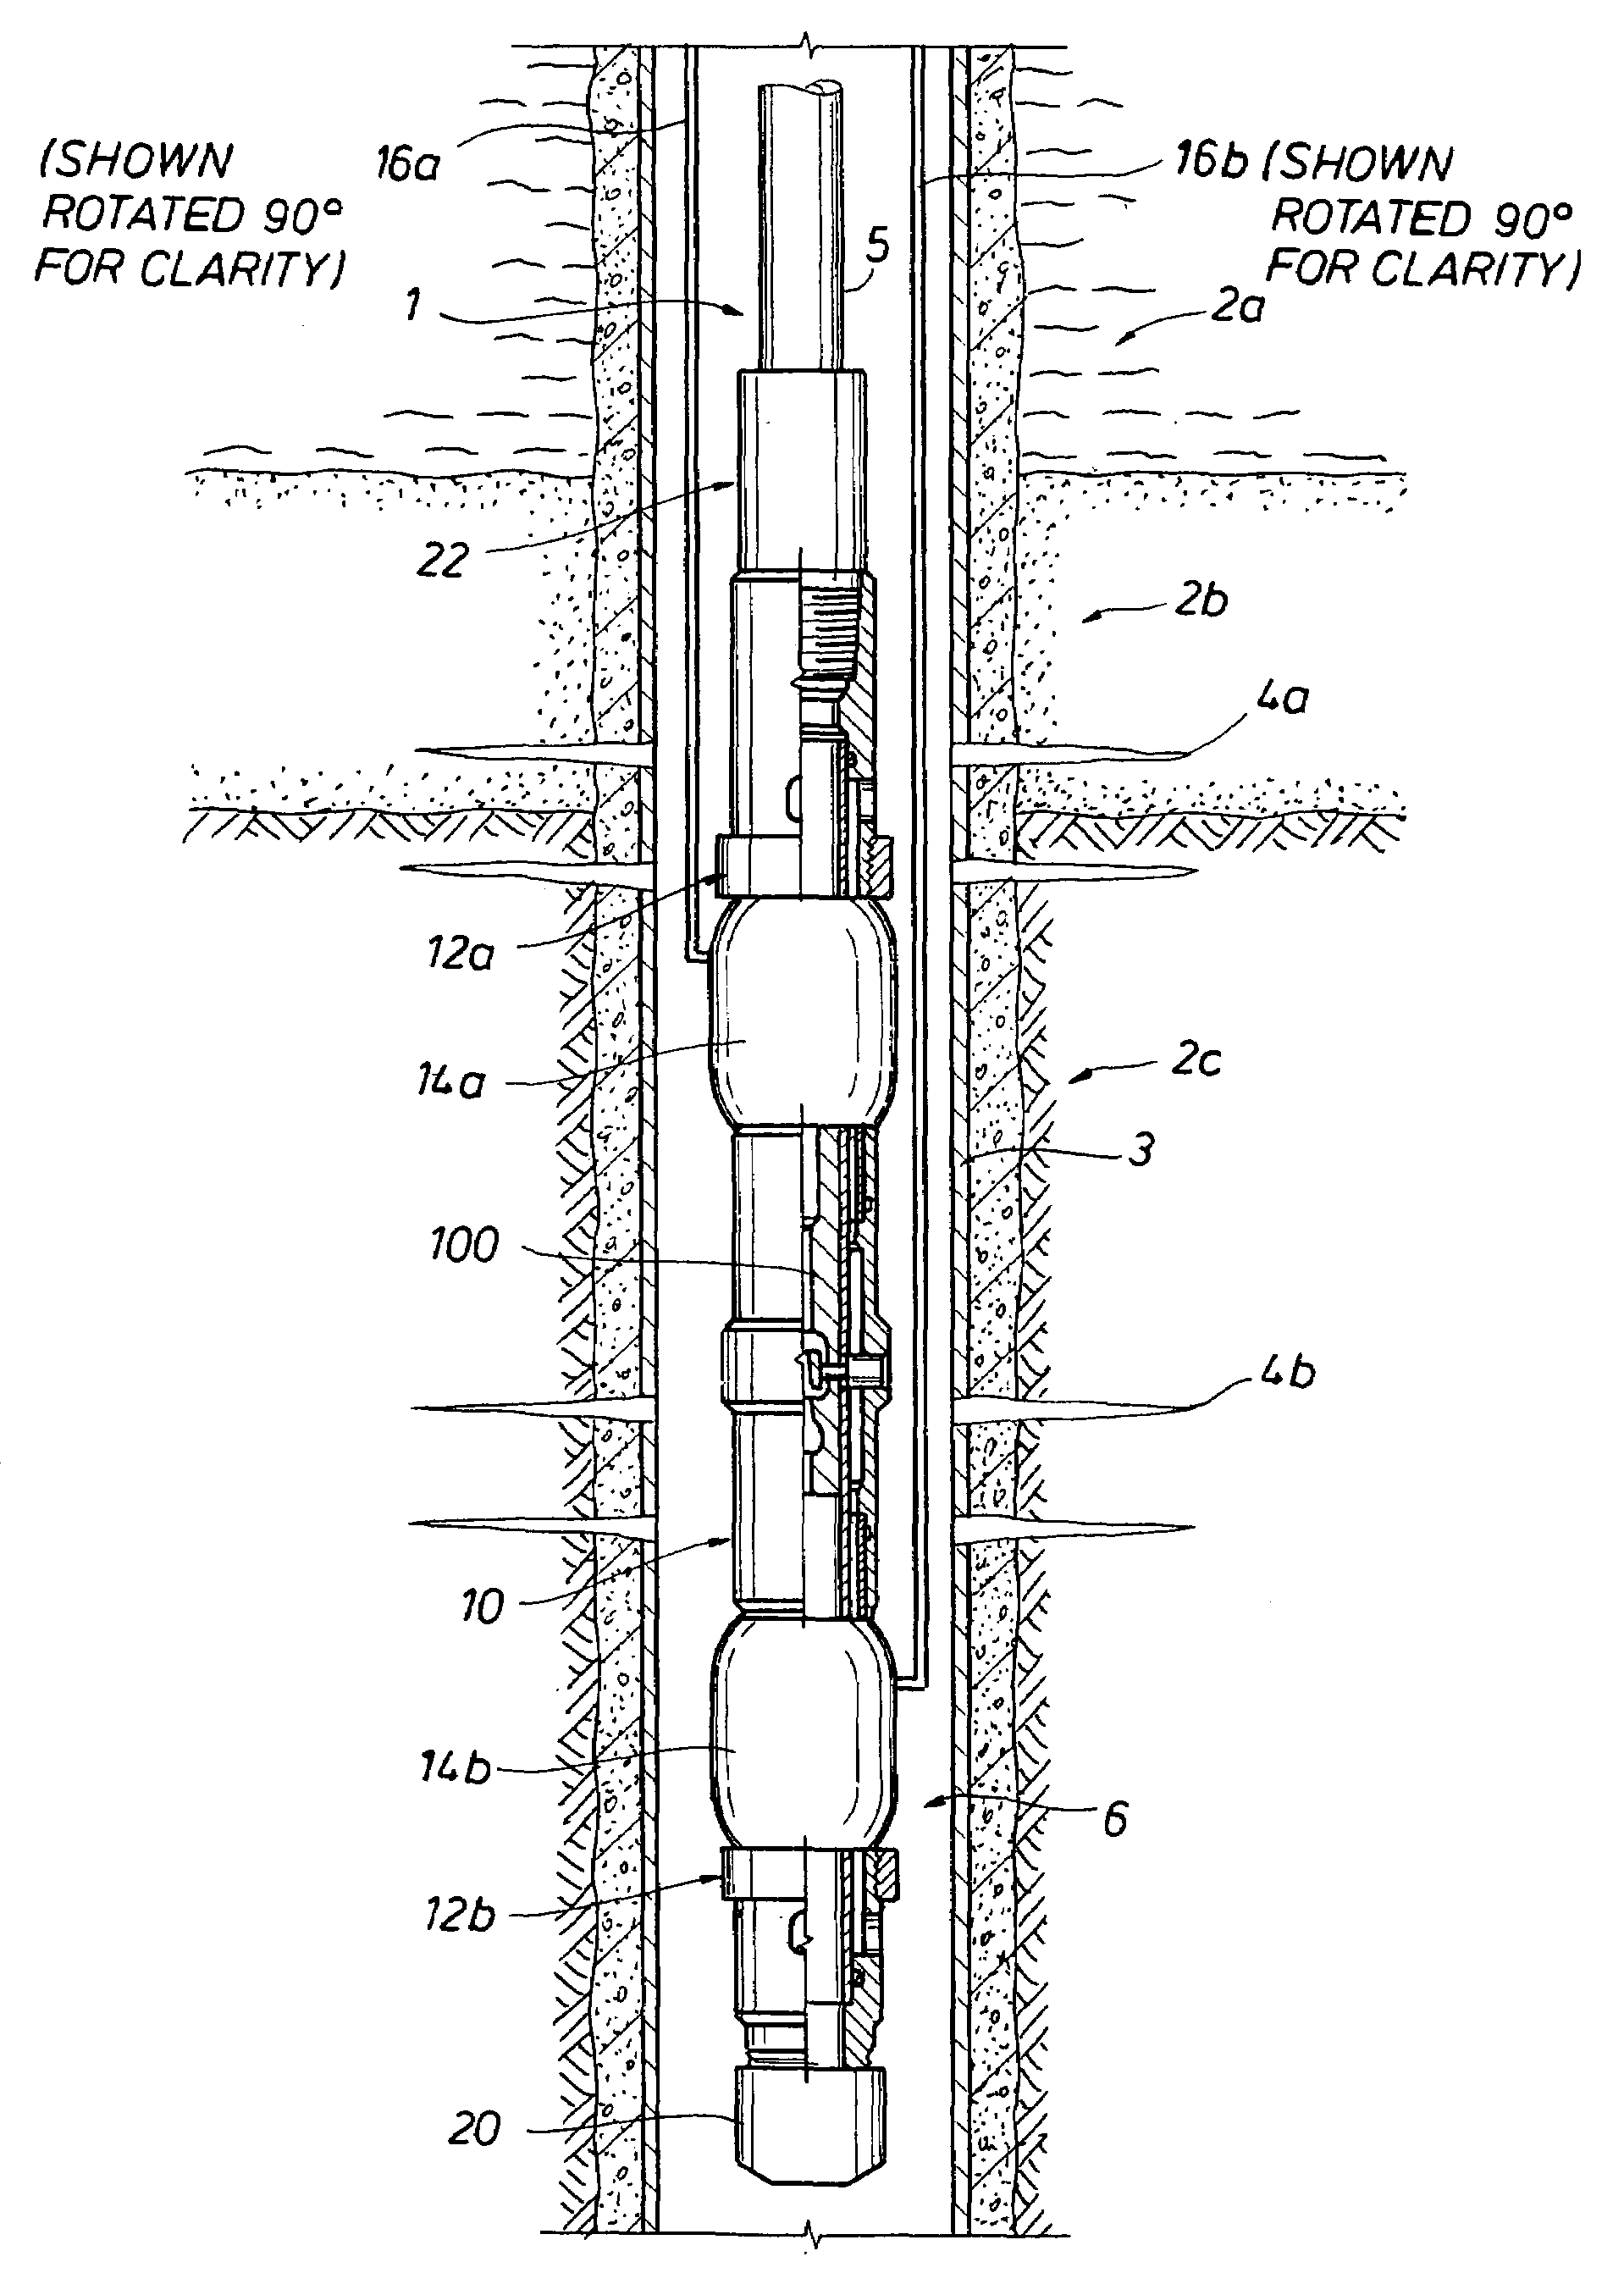 Methods for injecting a consolidation fluid into a wellbore at a subterranian location